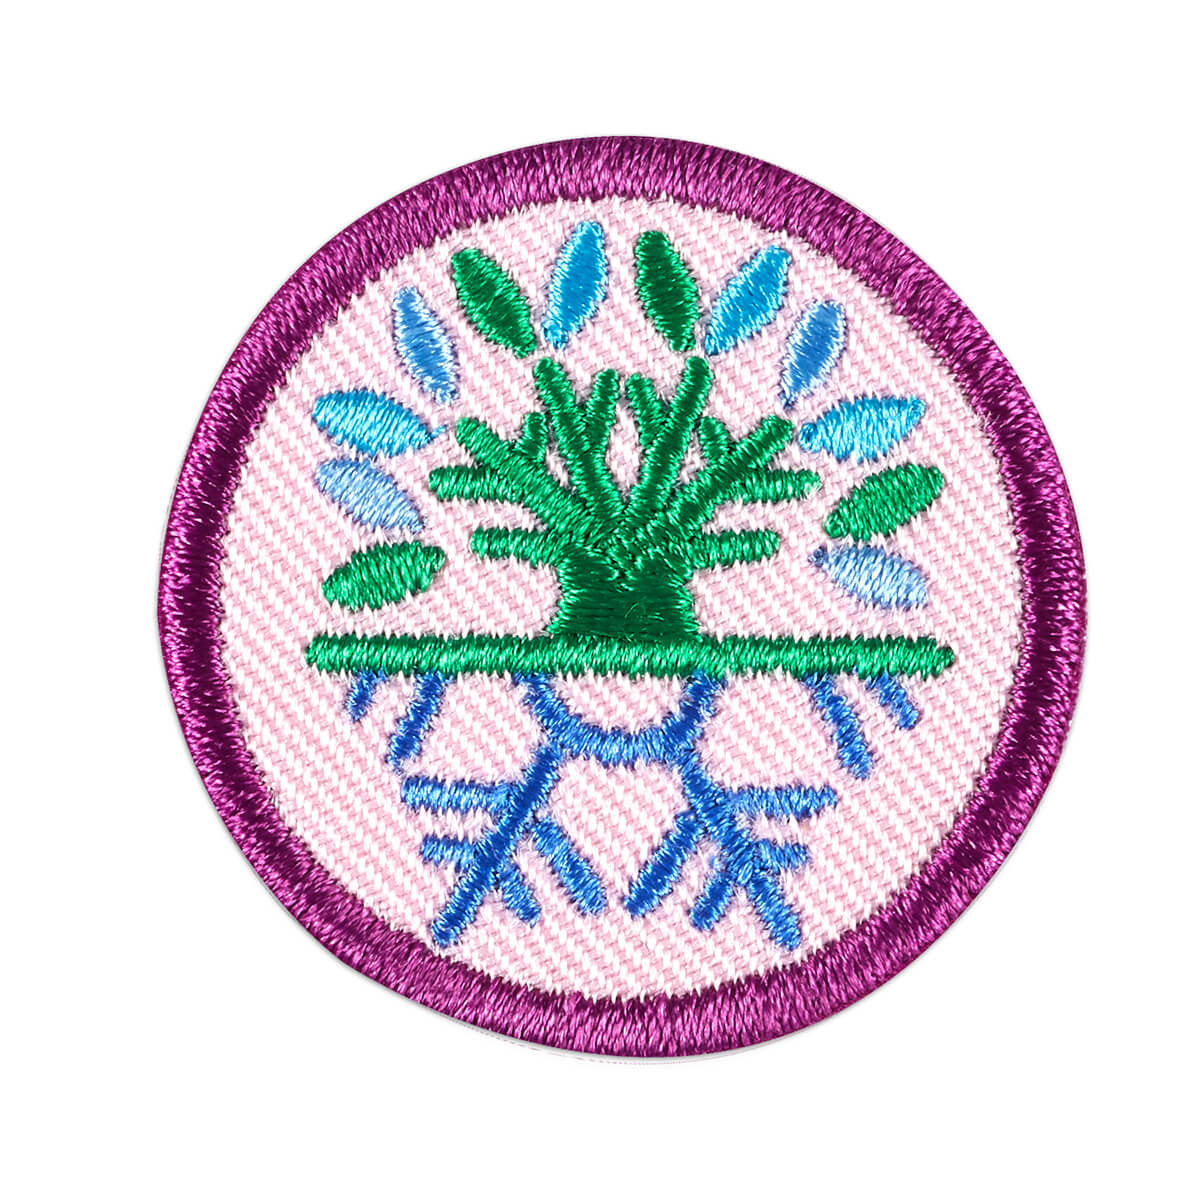 Girl Scouts Junior Snow or Climbing Adventure Badge - Basics Clothing Store